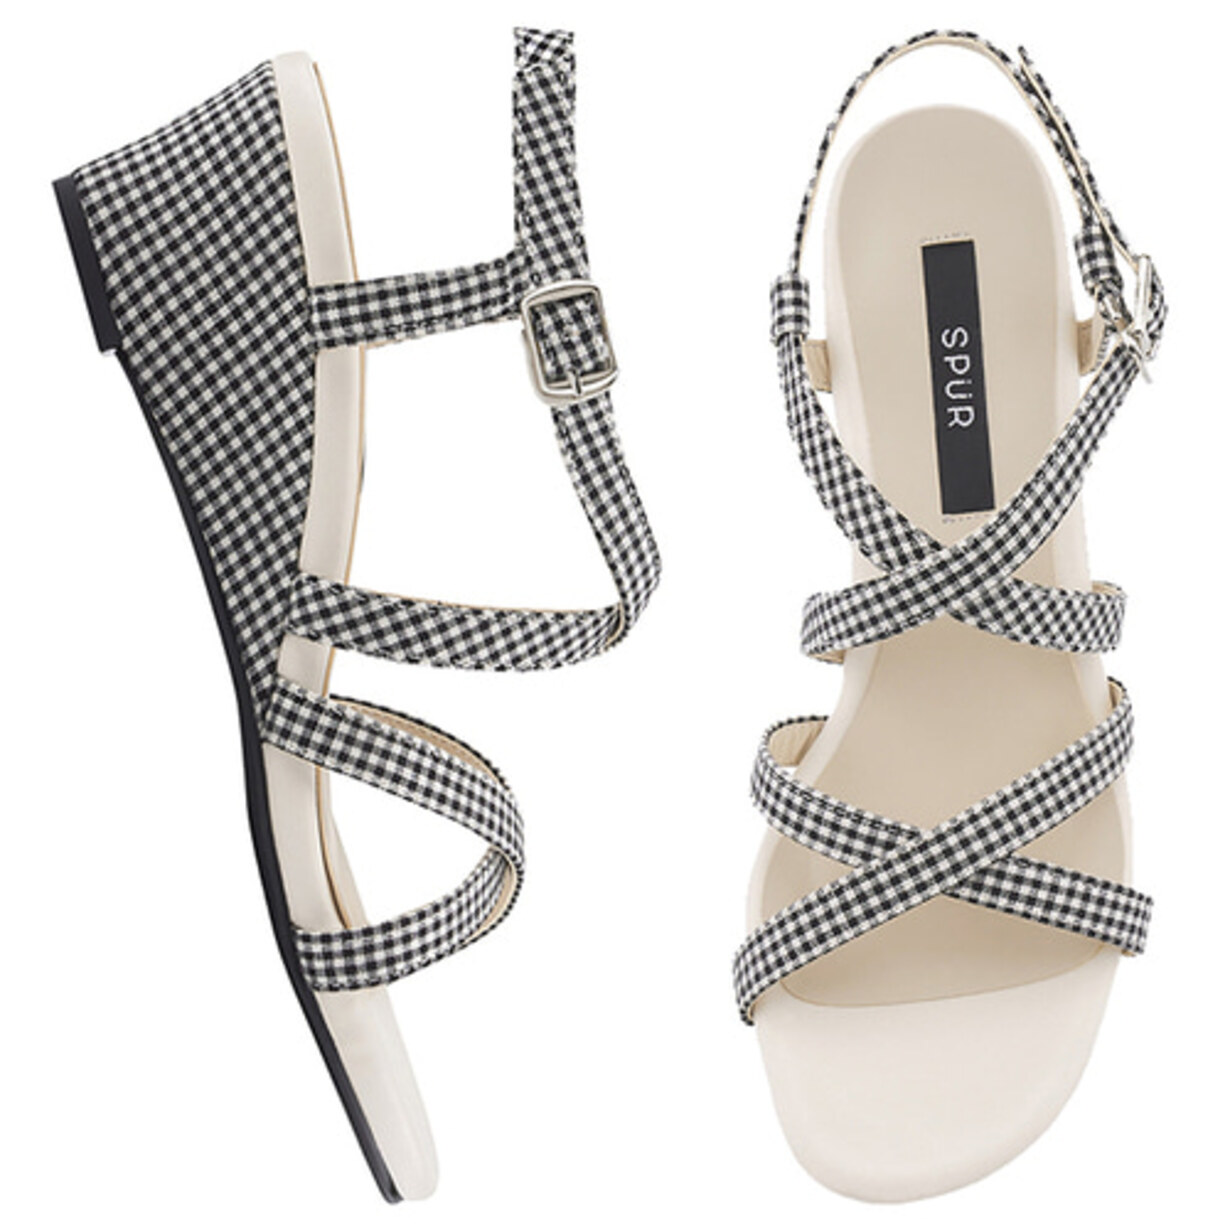 SPUR[스퍼]Double cross strap wedge -OS7071BK